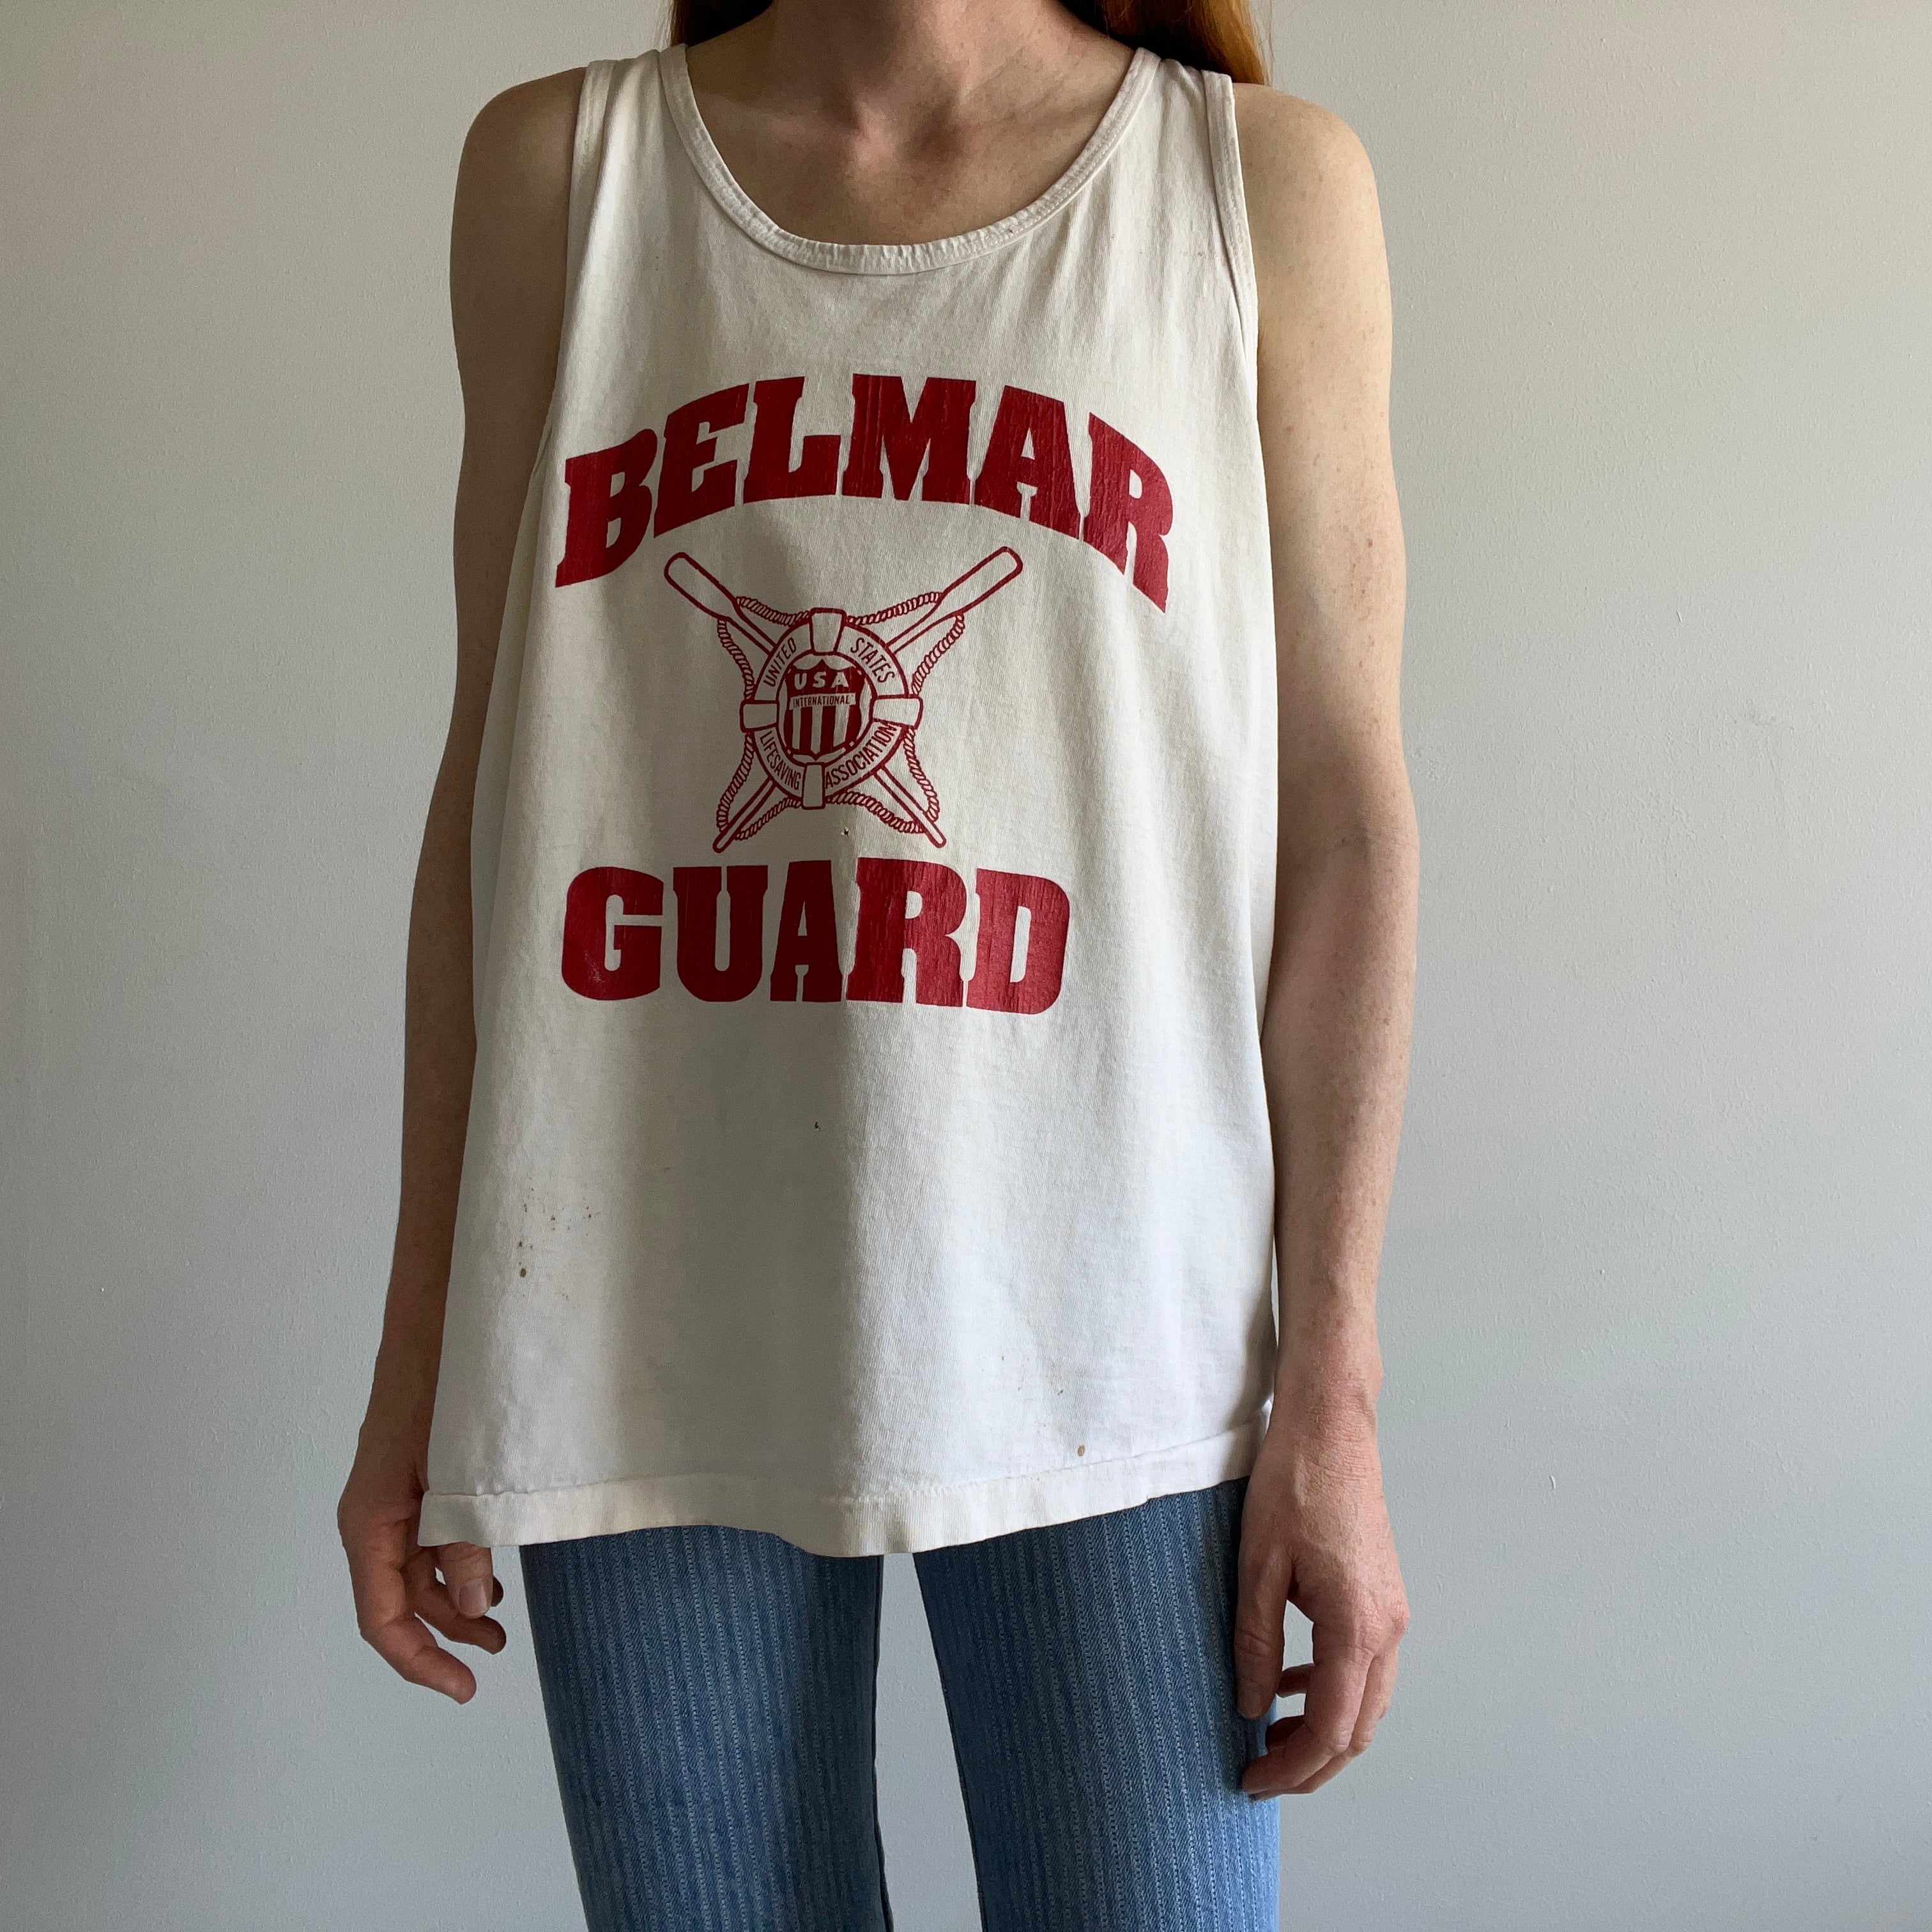 1980s Belmar Lifeguard Aged to Imperfection Tank Top